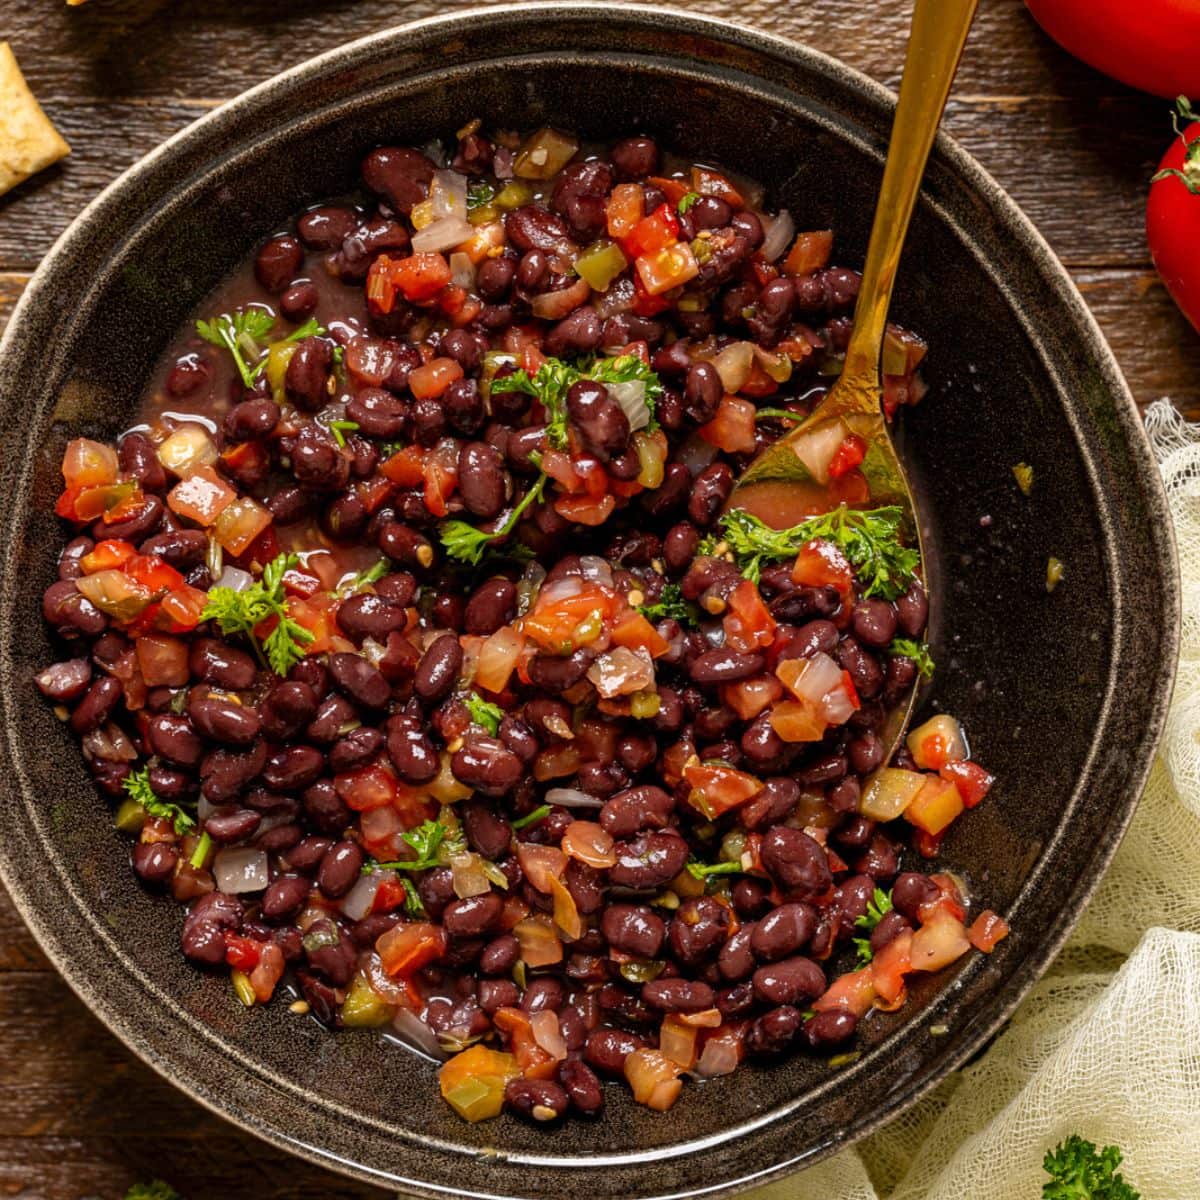 Black bean salad in a bowl with a gold spoon, crackers, and tomatoes.